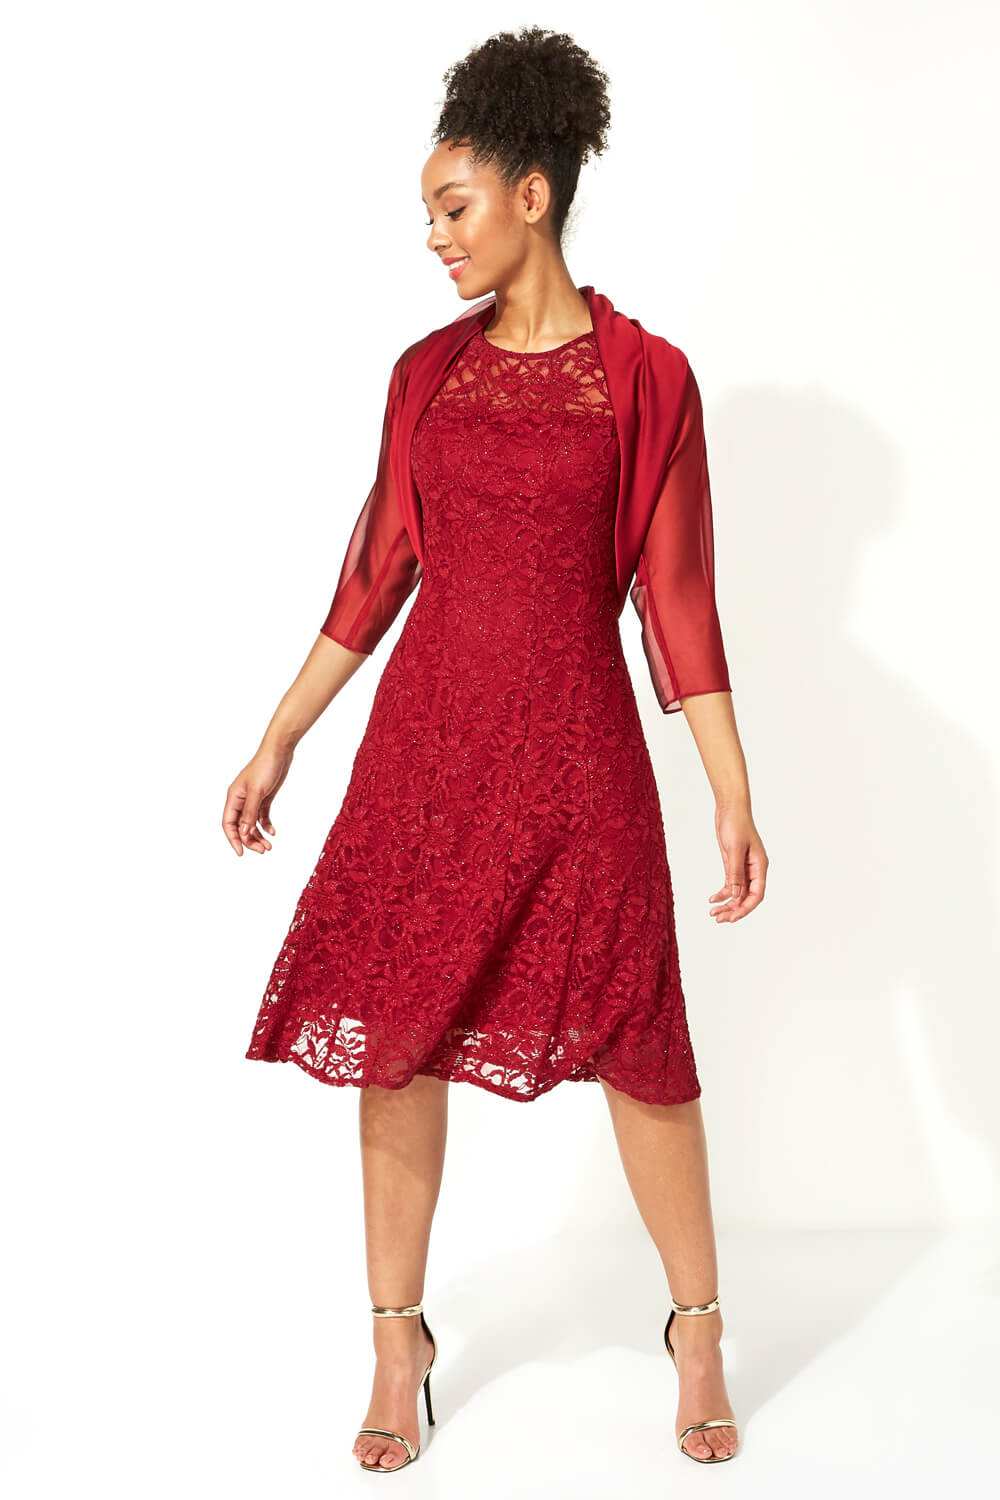 sund fornuft Pasture Samlet Glitter Lace Fit and Flare Dress in Red - Roman Originals UK